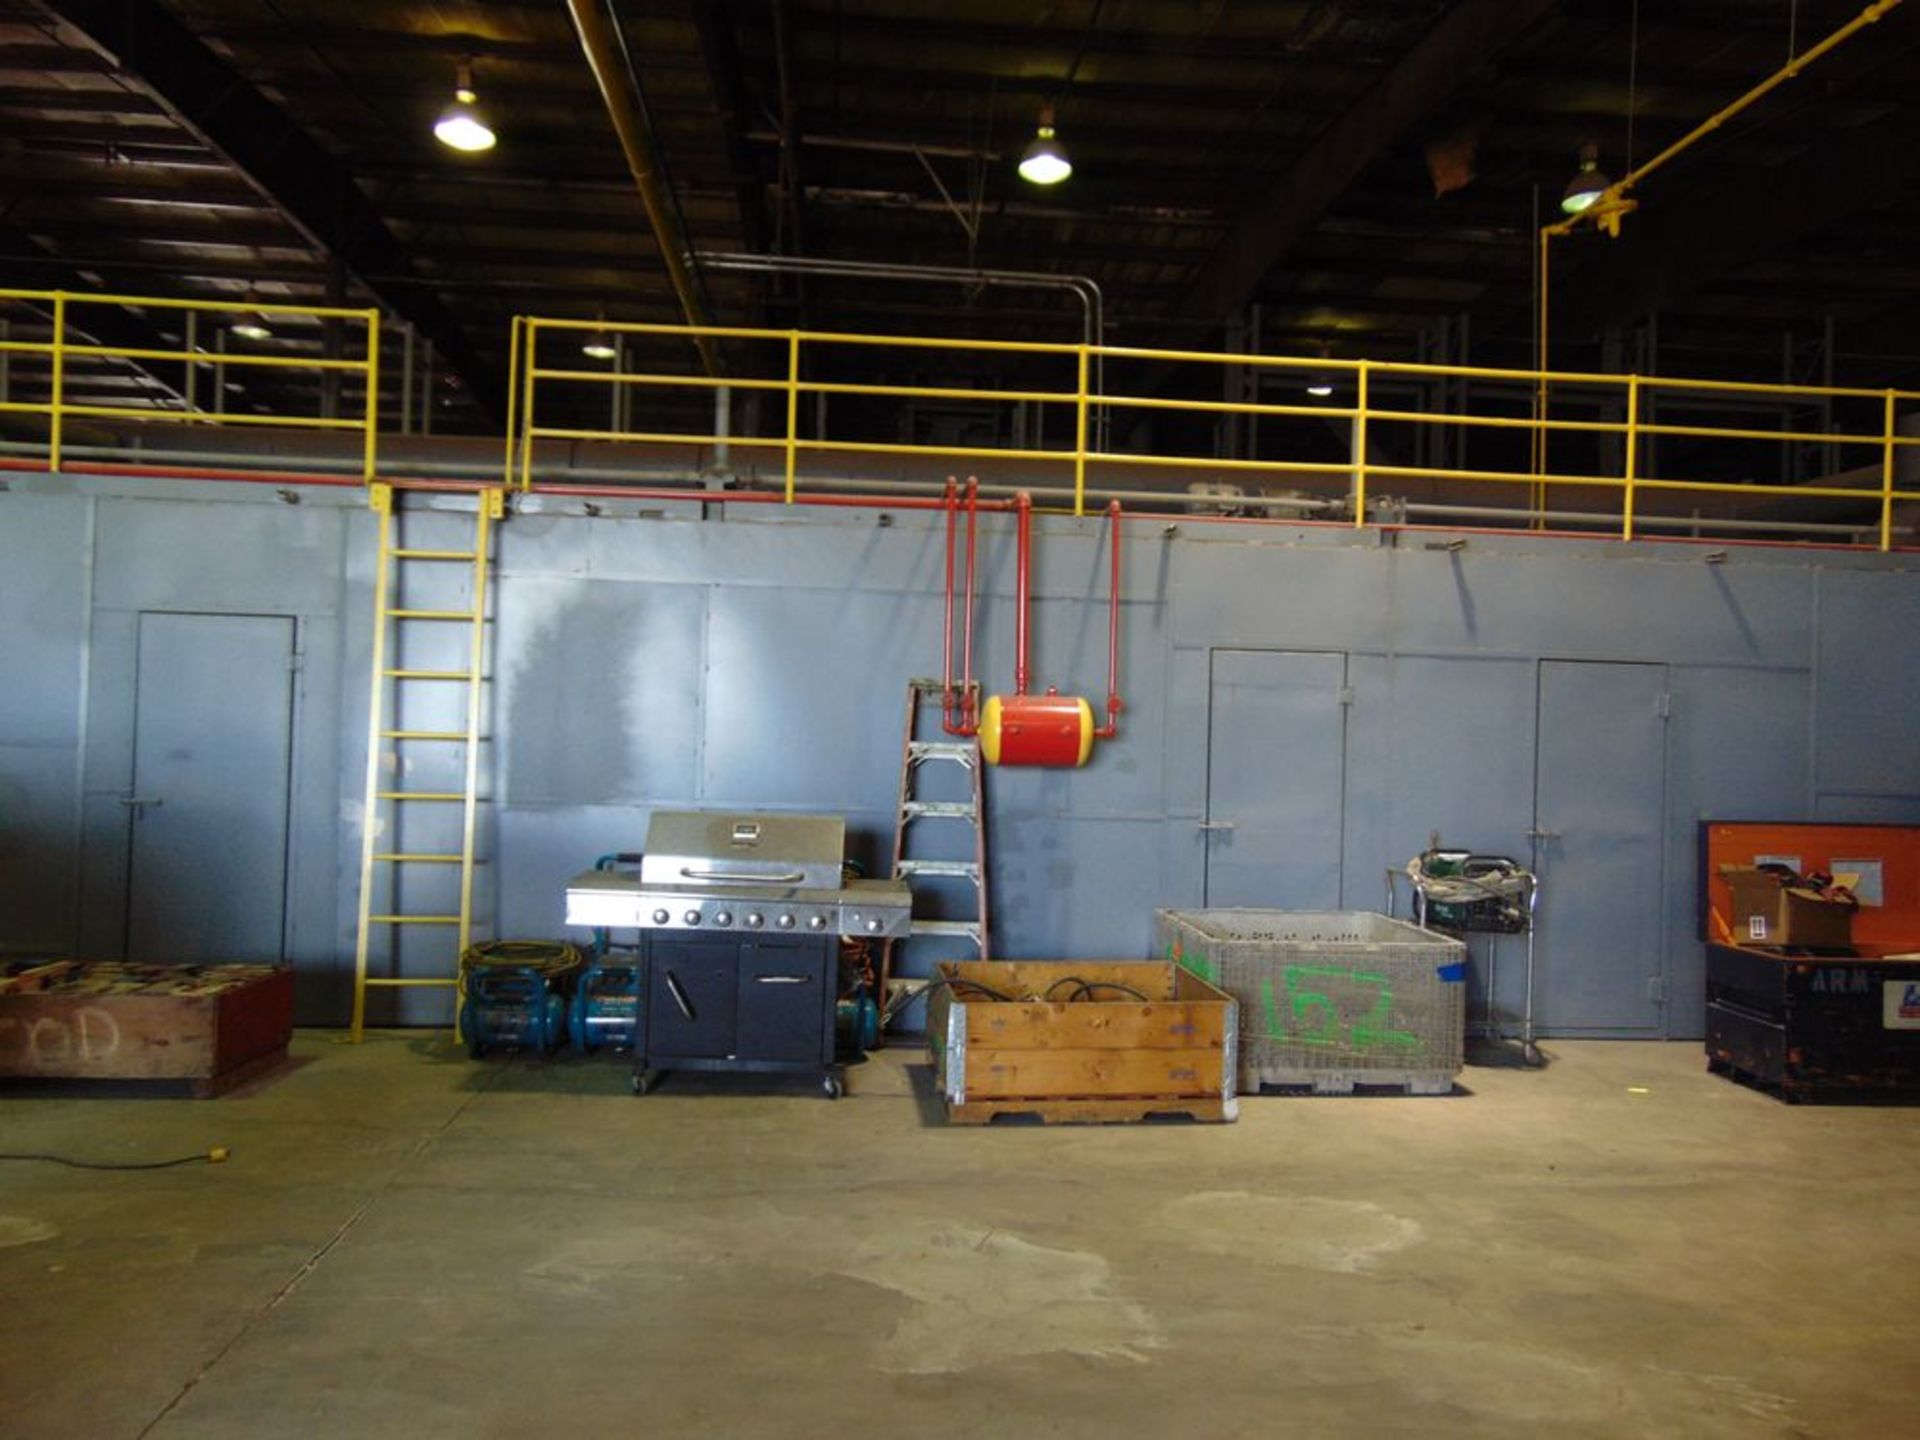 Process Engineering 10' x 60' x 92'' x 2000° Conveyorized Curing Oven w/ 30hp Main Drive, Chain Type - Image 2 of 5